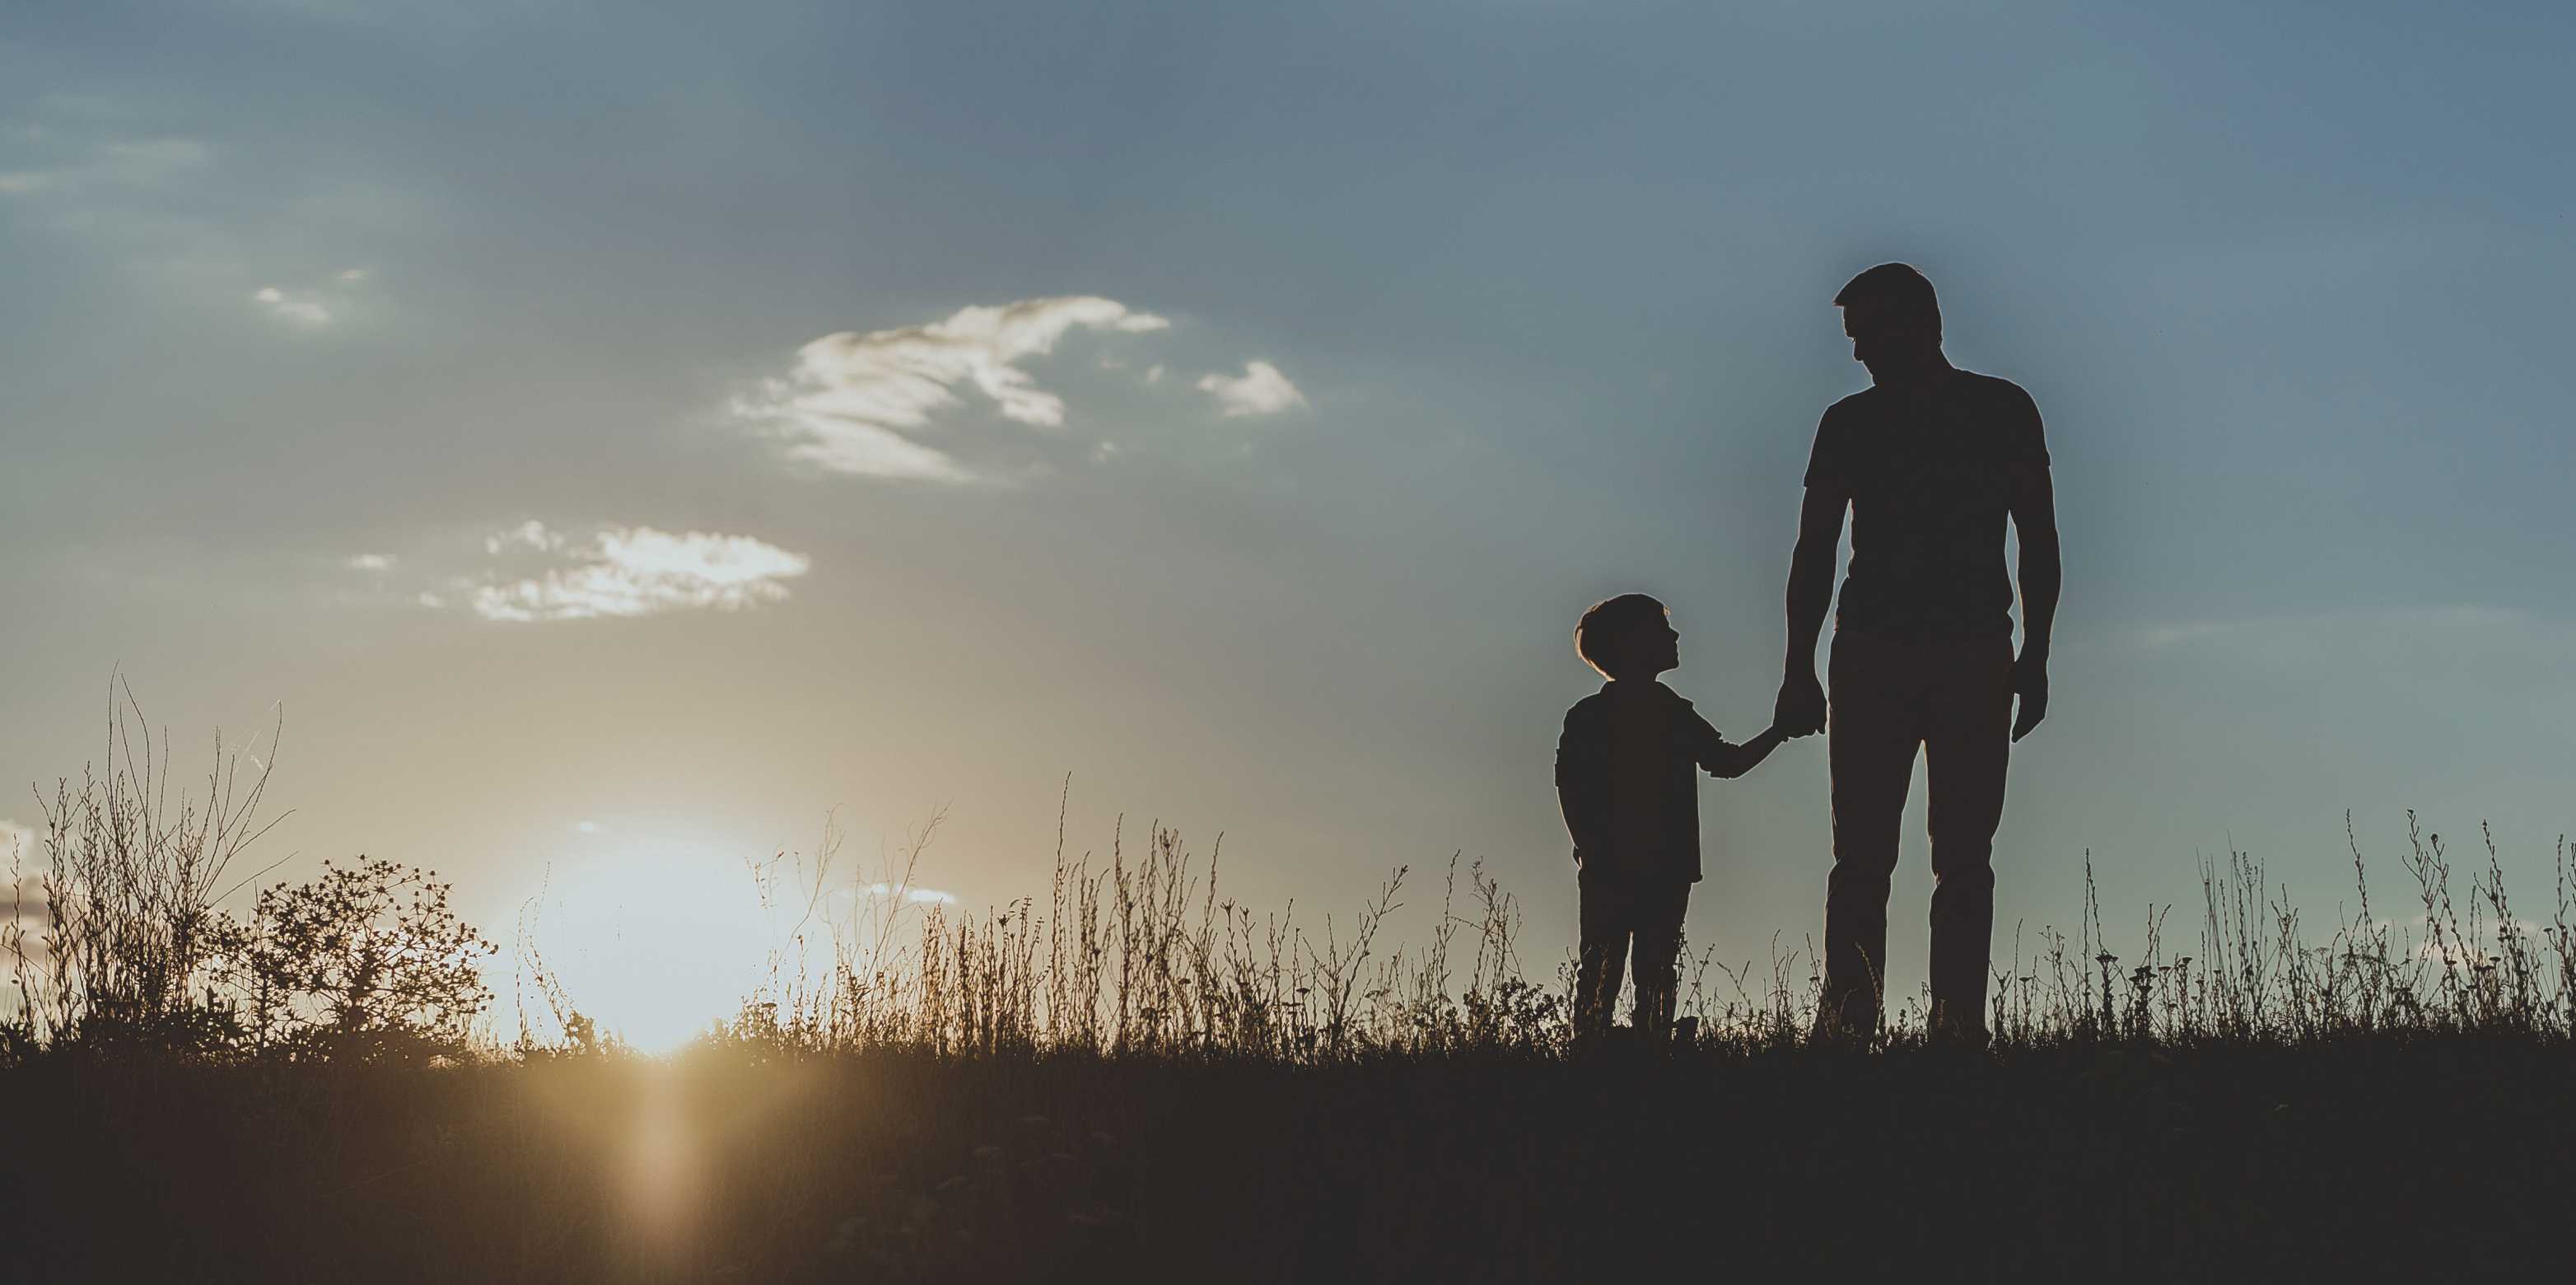 Sunrise or sunset in the background, in the foreground father and son holding hands in a meadow.